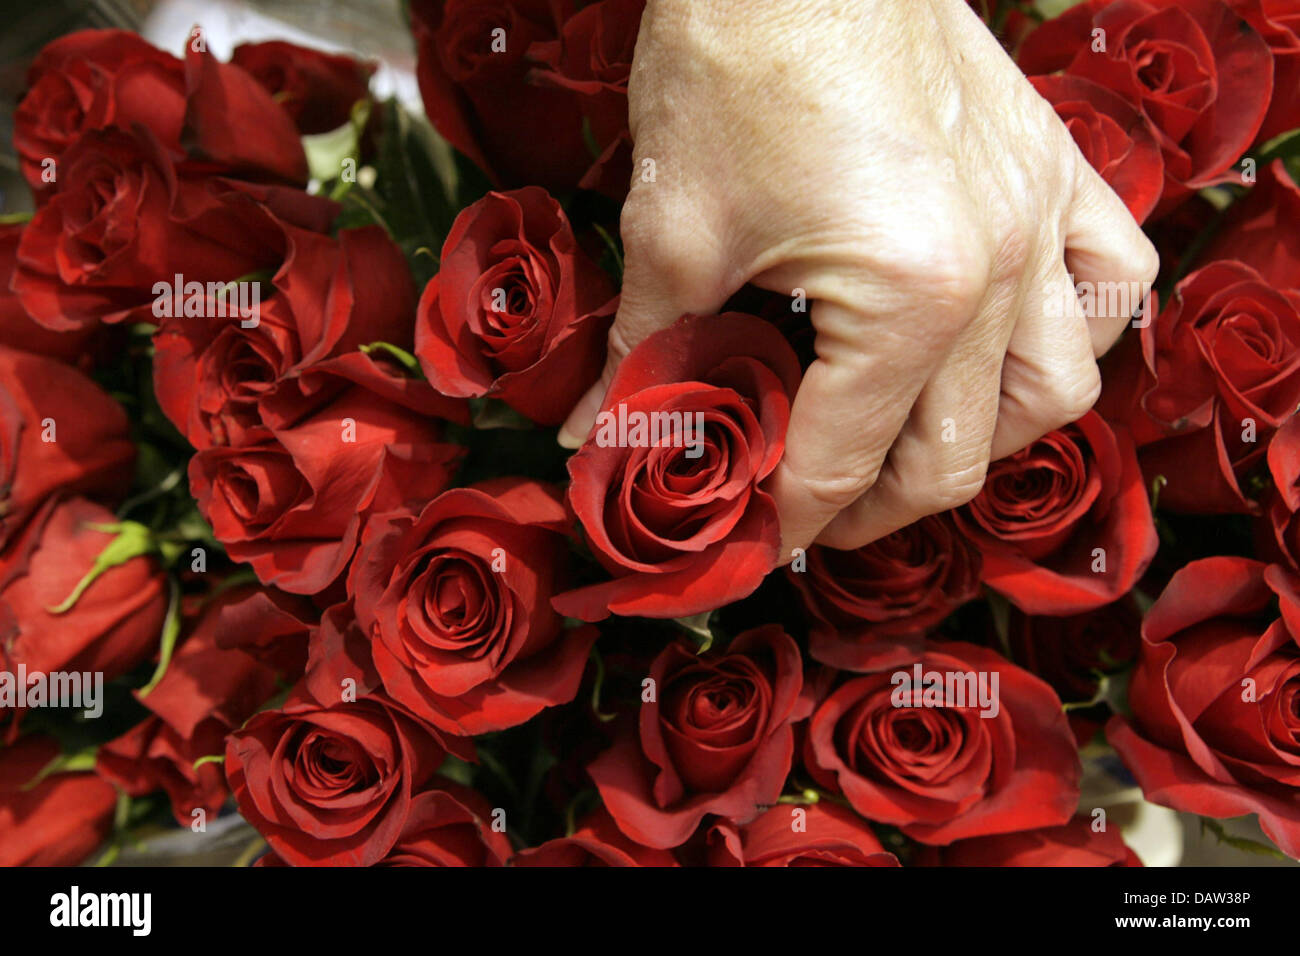 A salesperson grabs a rose from Columbia in a wholesale flower market in Hamburg, Germany, Monday, 12 February 2007. German flower shops prepare for Valentine's Day (February 14th), which lovers traditionally celebrate to express their love for each other; presenting amongst others Valentine's flowers. Photo: Sebastian Widmann Stock Photo